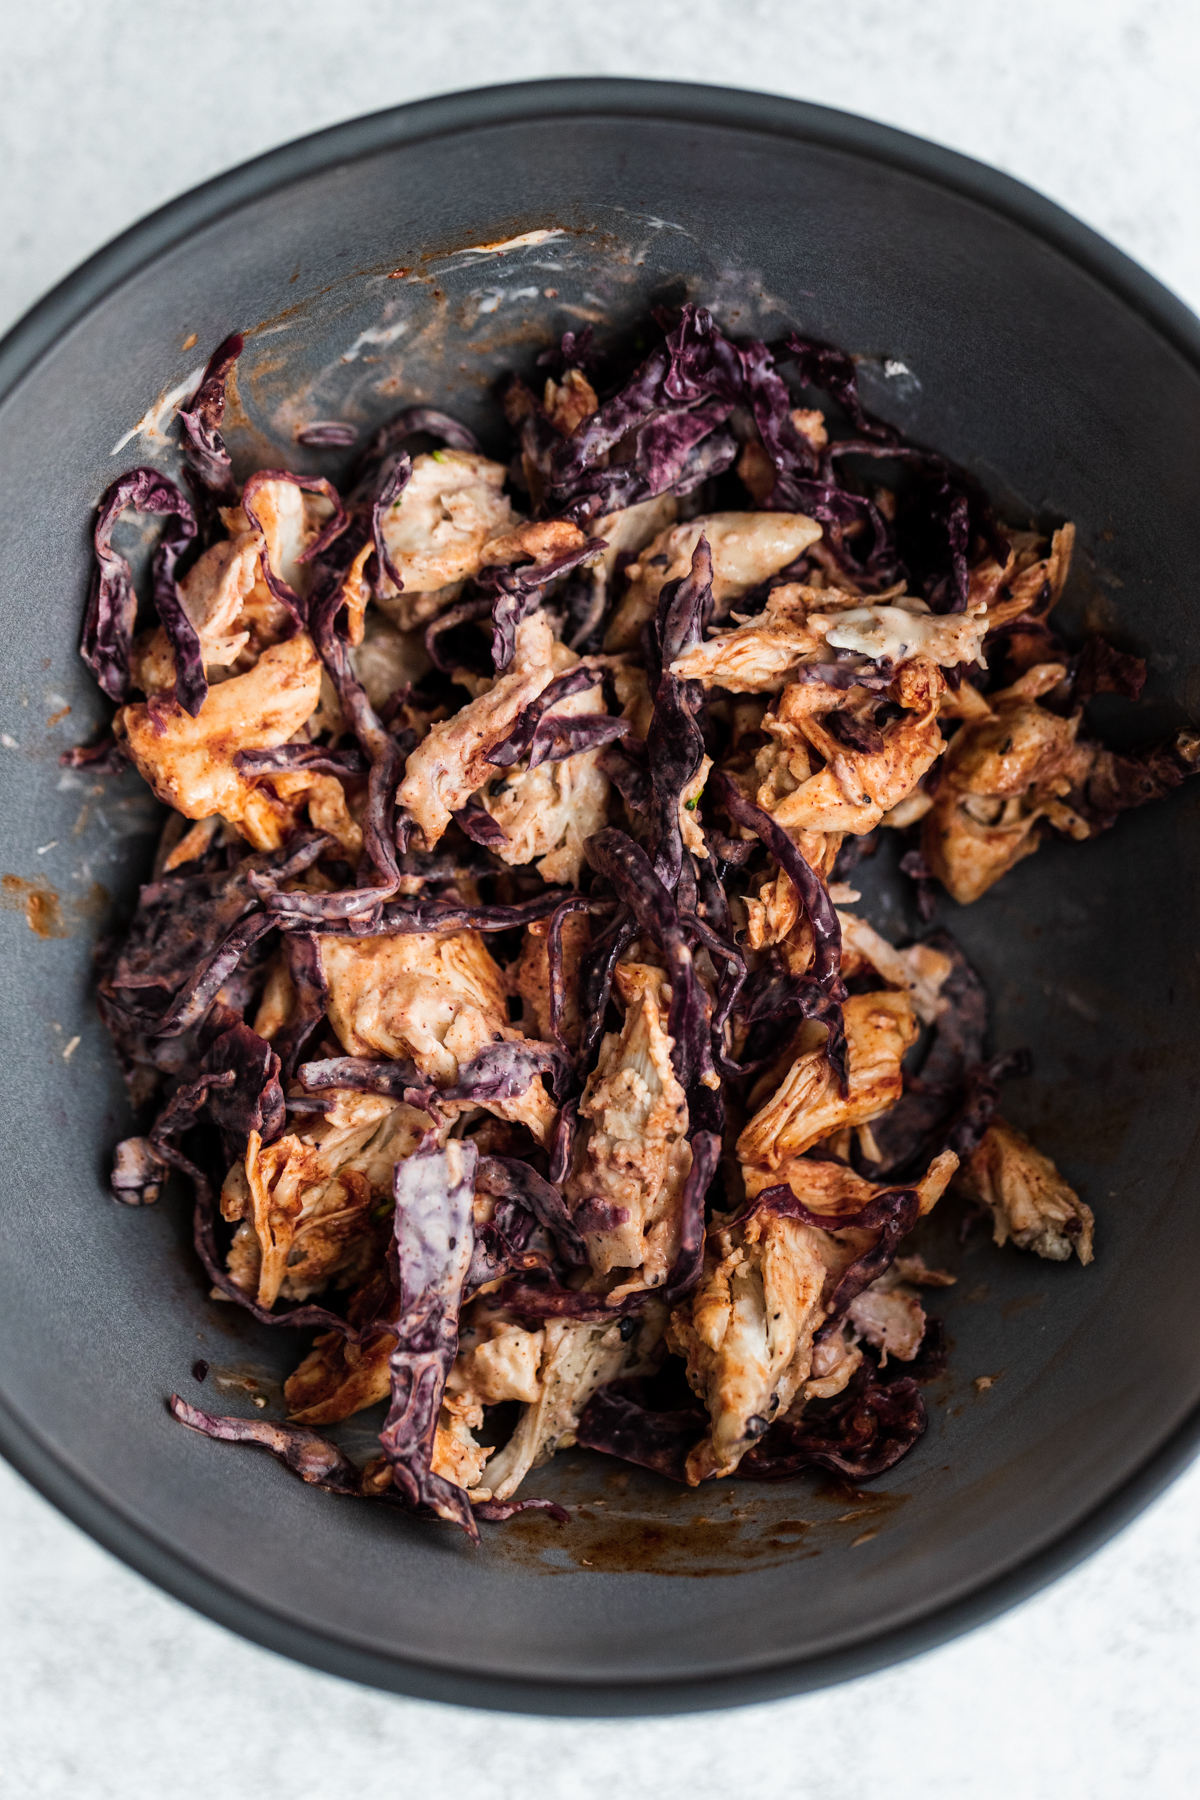 Overhead shot of shredded chicken, red cabbage sauerkraut and hot sauce mayo in a bowl.